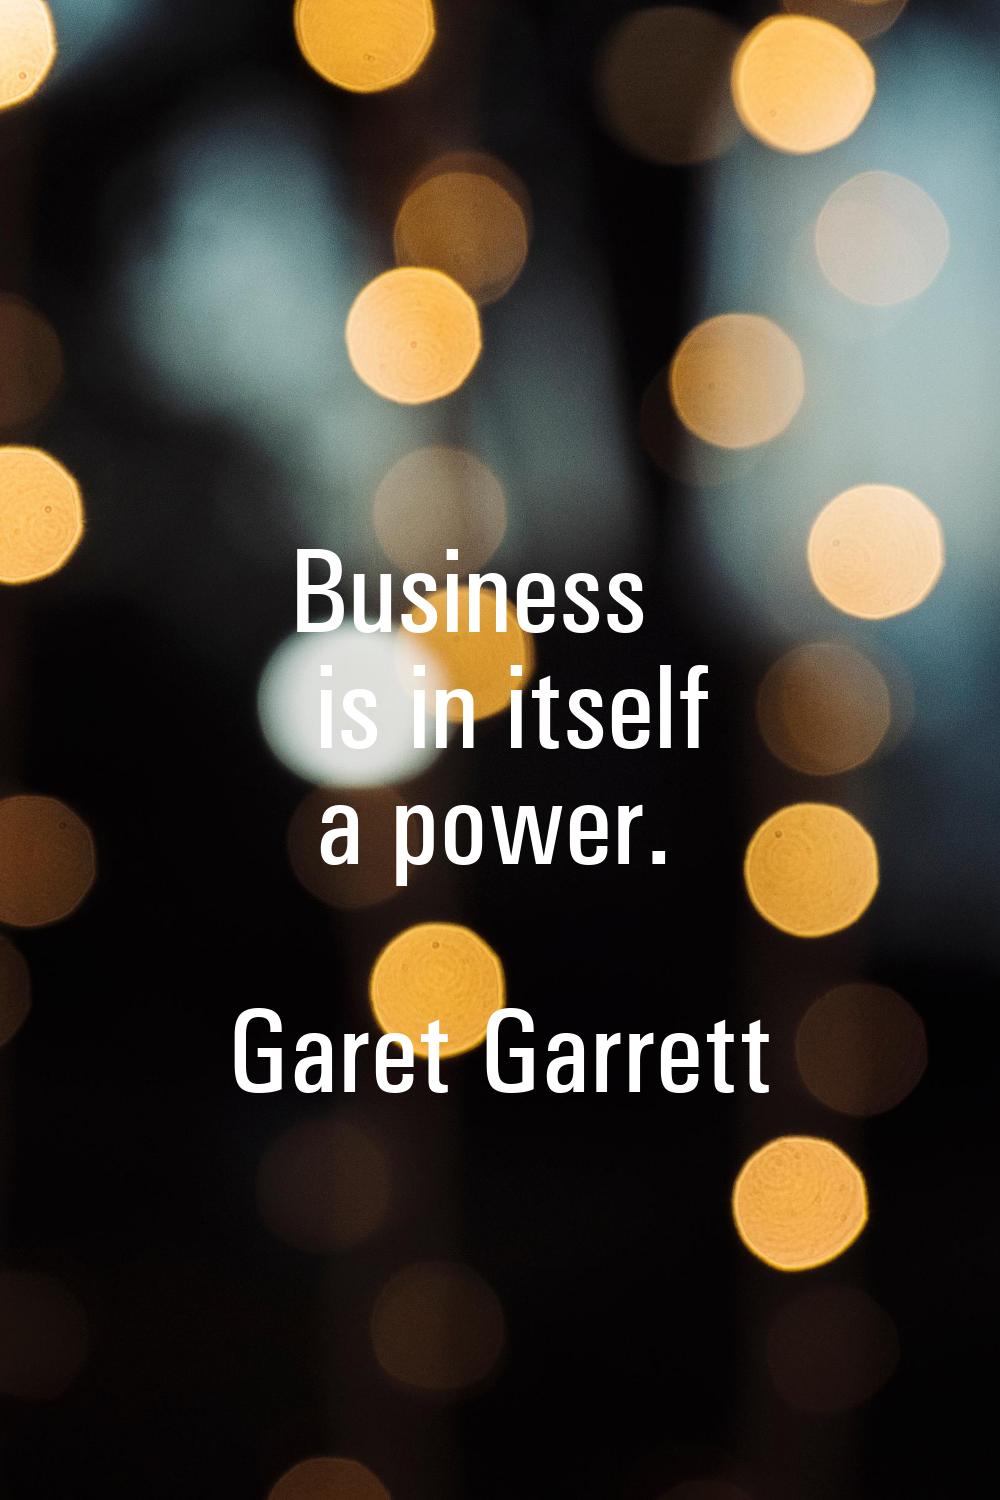 Business is in itself a power.